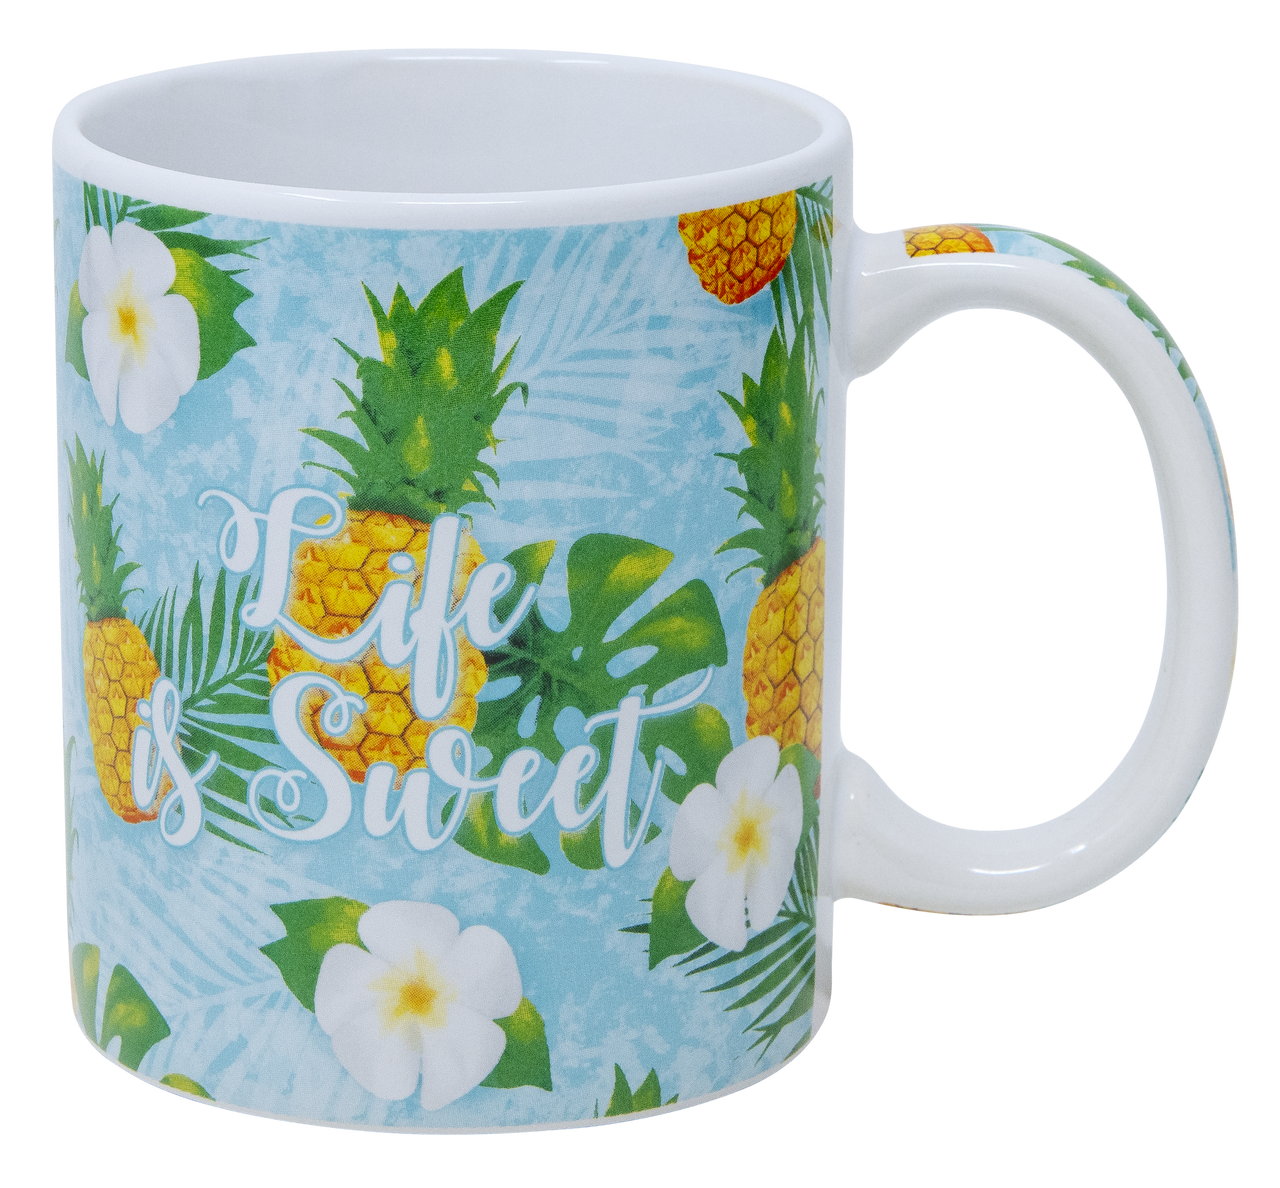 https://cdn11.bigcommerce.com/s-do3nxddvbo/images/stencil/1280x1280/products/4736/8540/ISCM-CeramicMug-LifeIsSweet__91519.1661301198.png?c=1